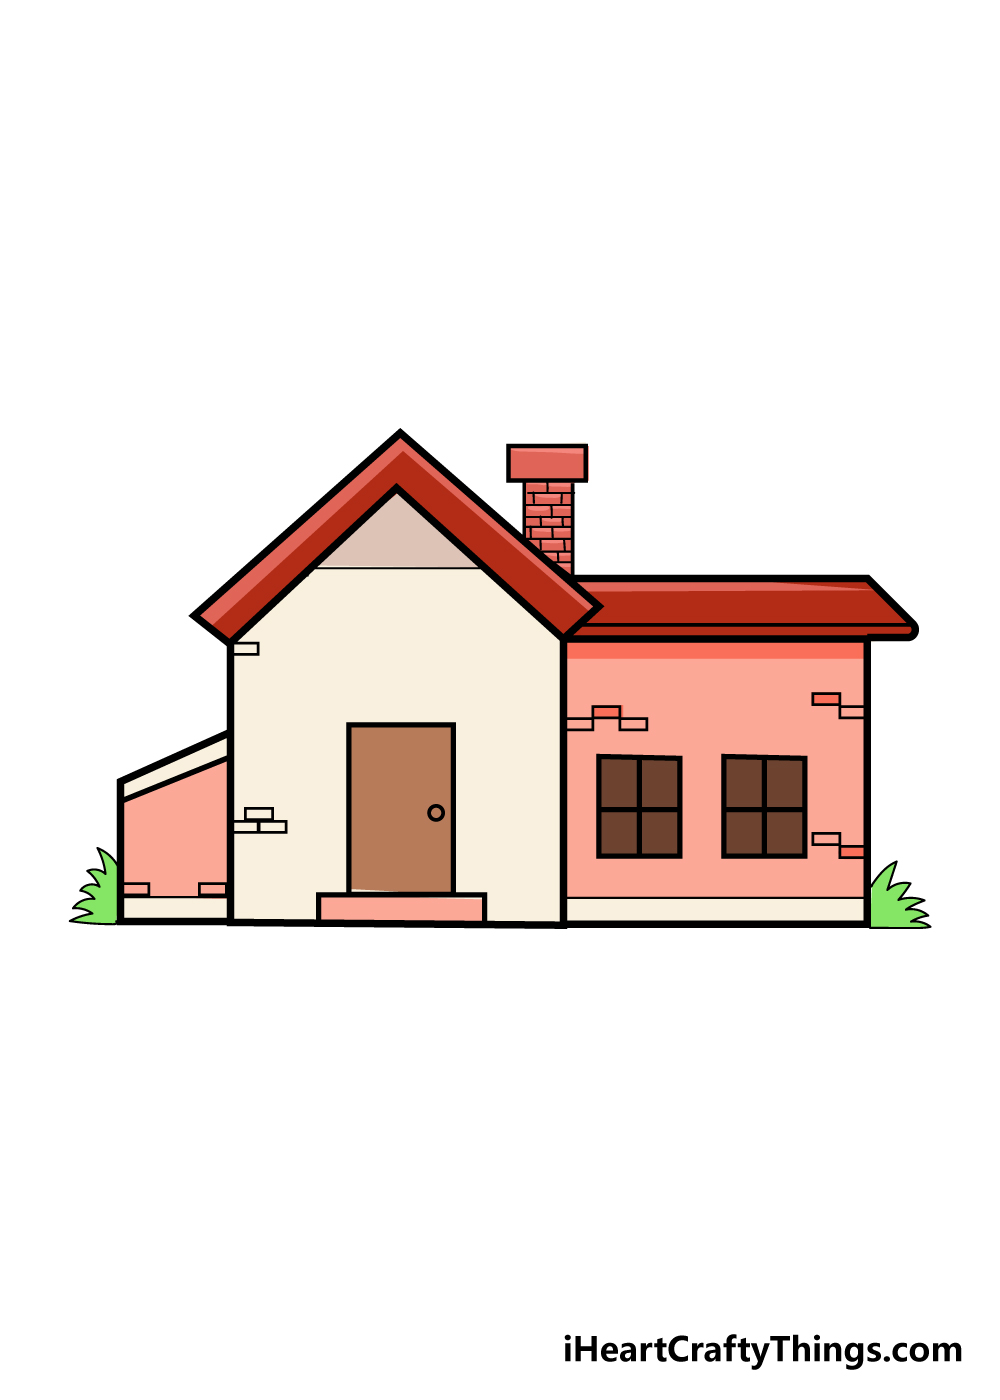 House Drawing - How To Draw A House Step By Step